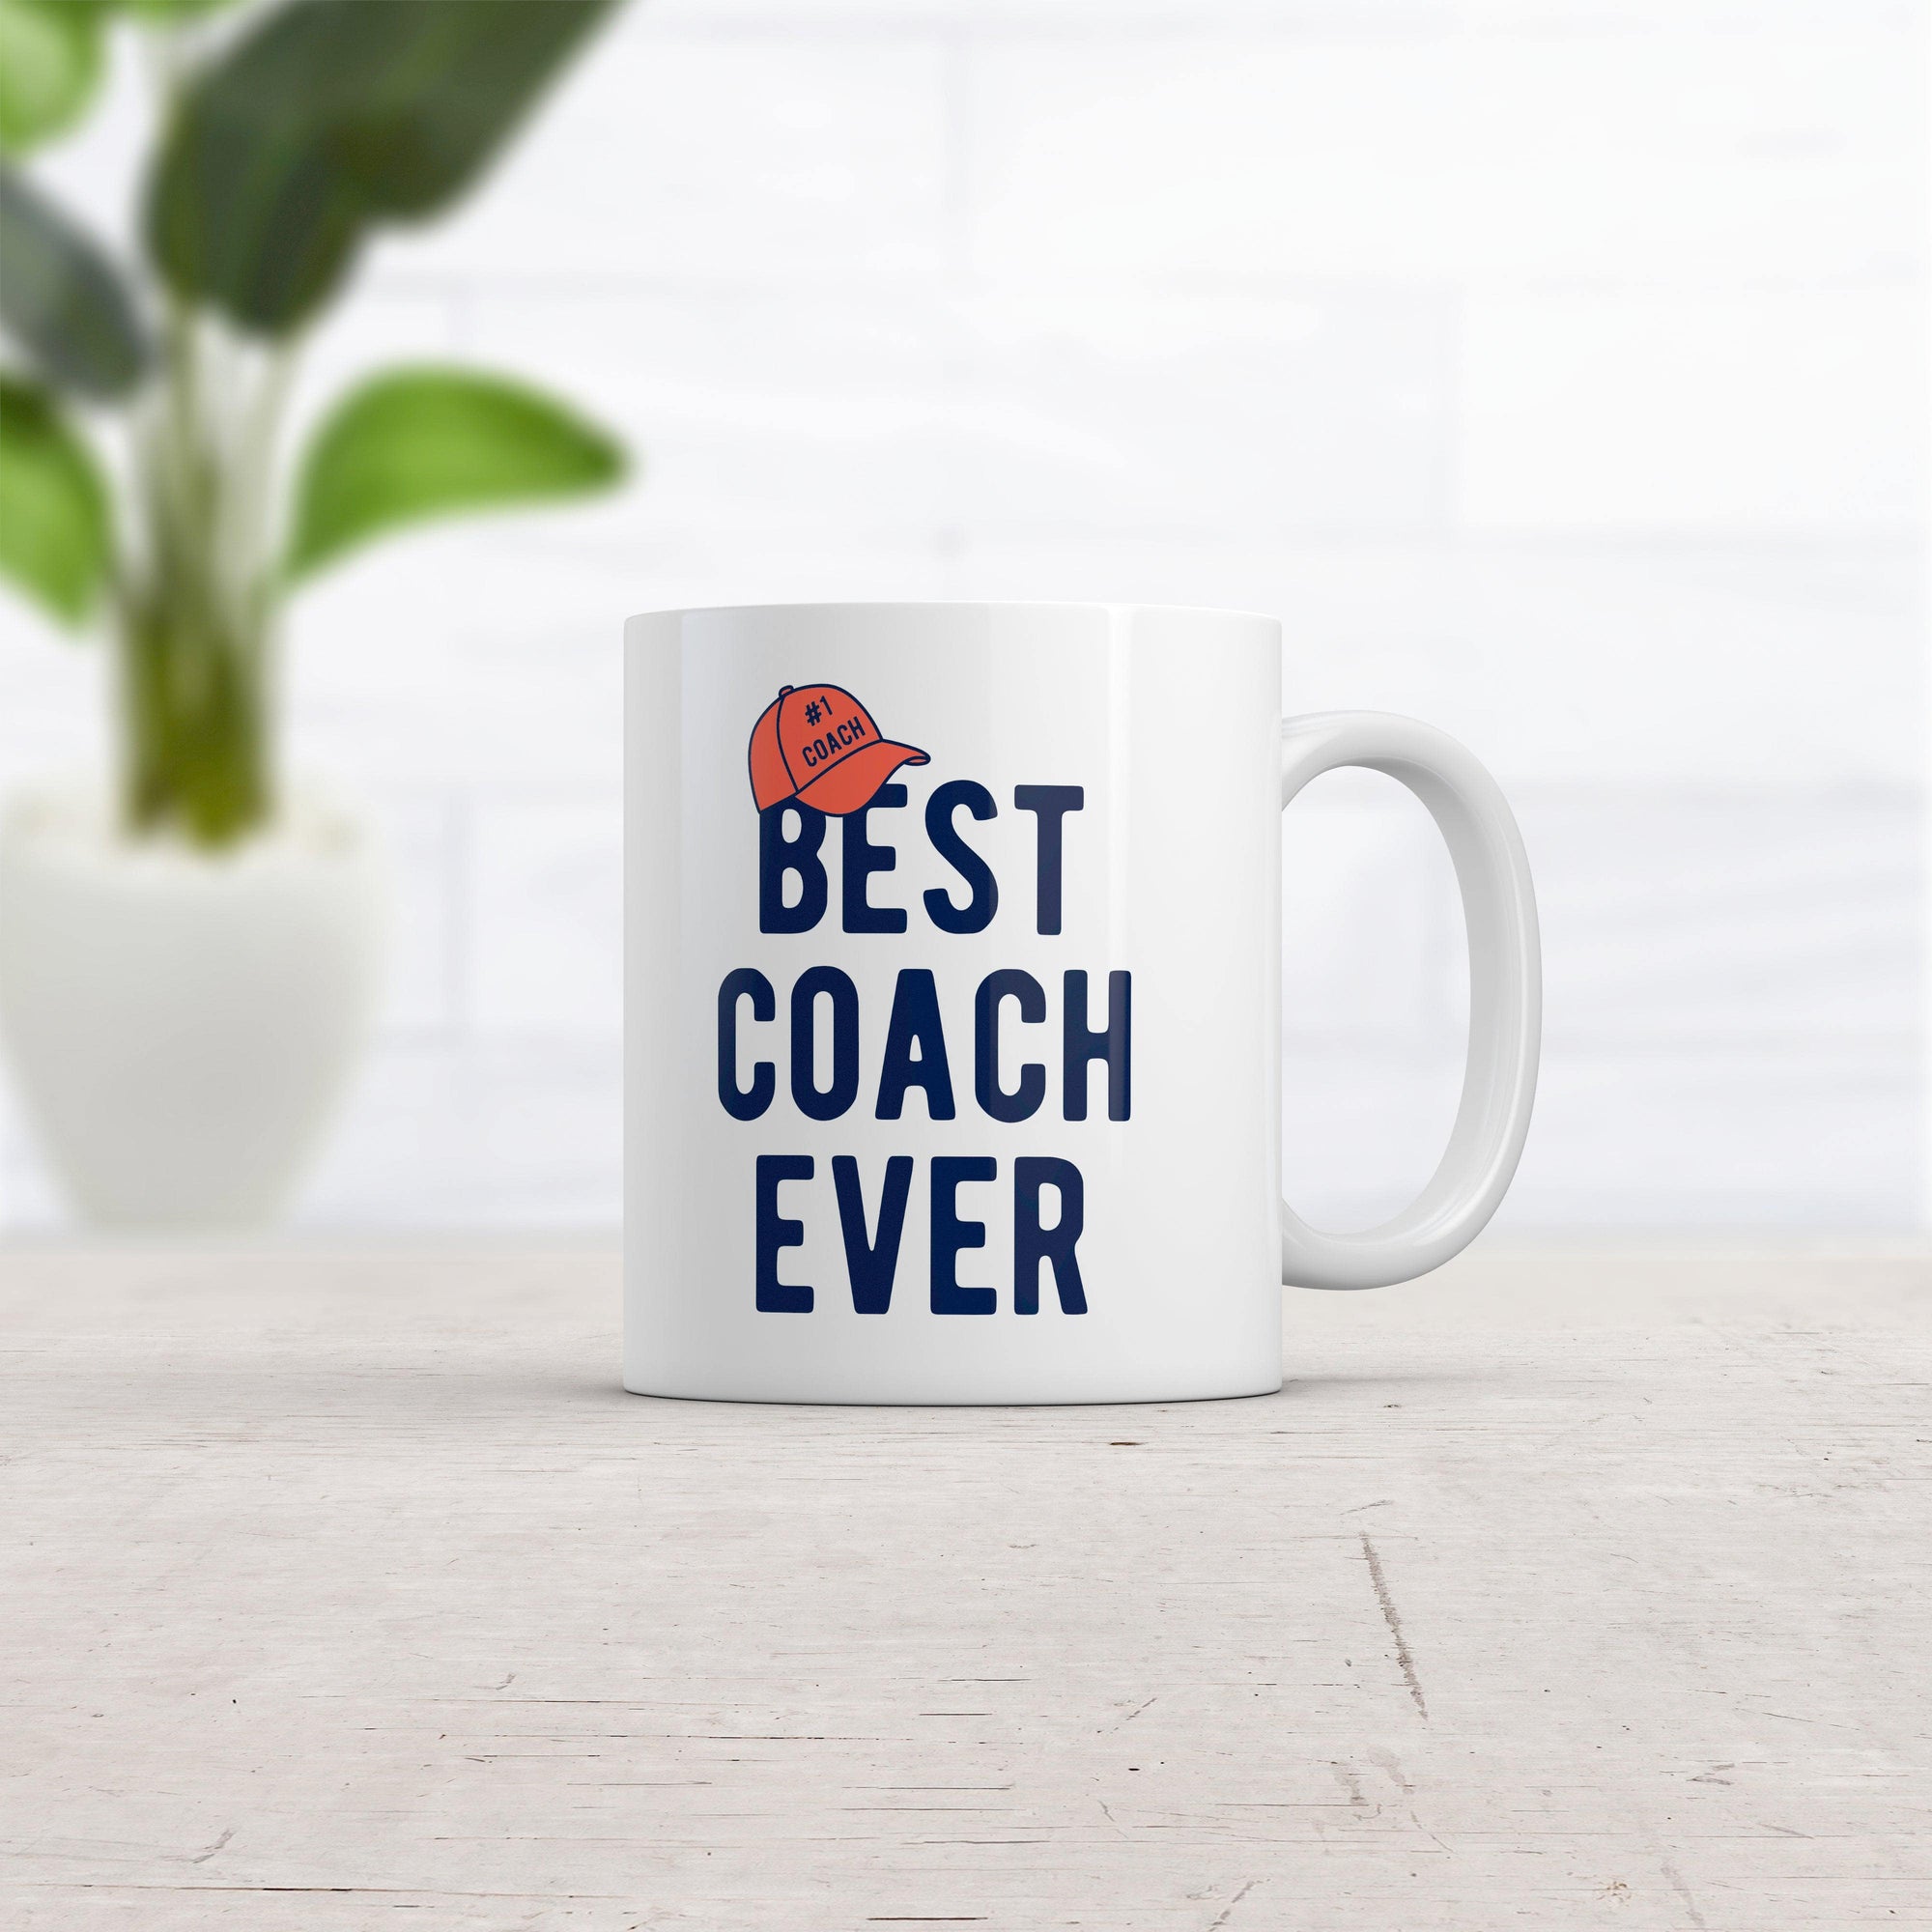 Best Coach Ever Mug Cool Athlete Coaching Gift Graphic Novelty Coffee Cup-11oz  -  Crazy Dog T-Shirts